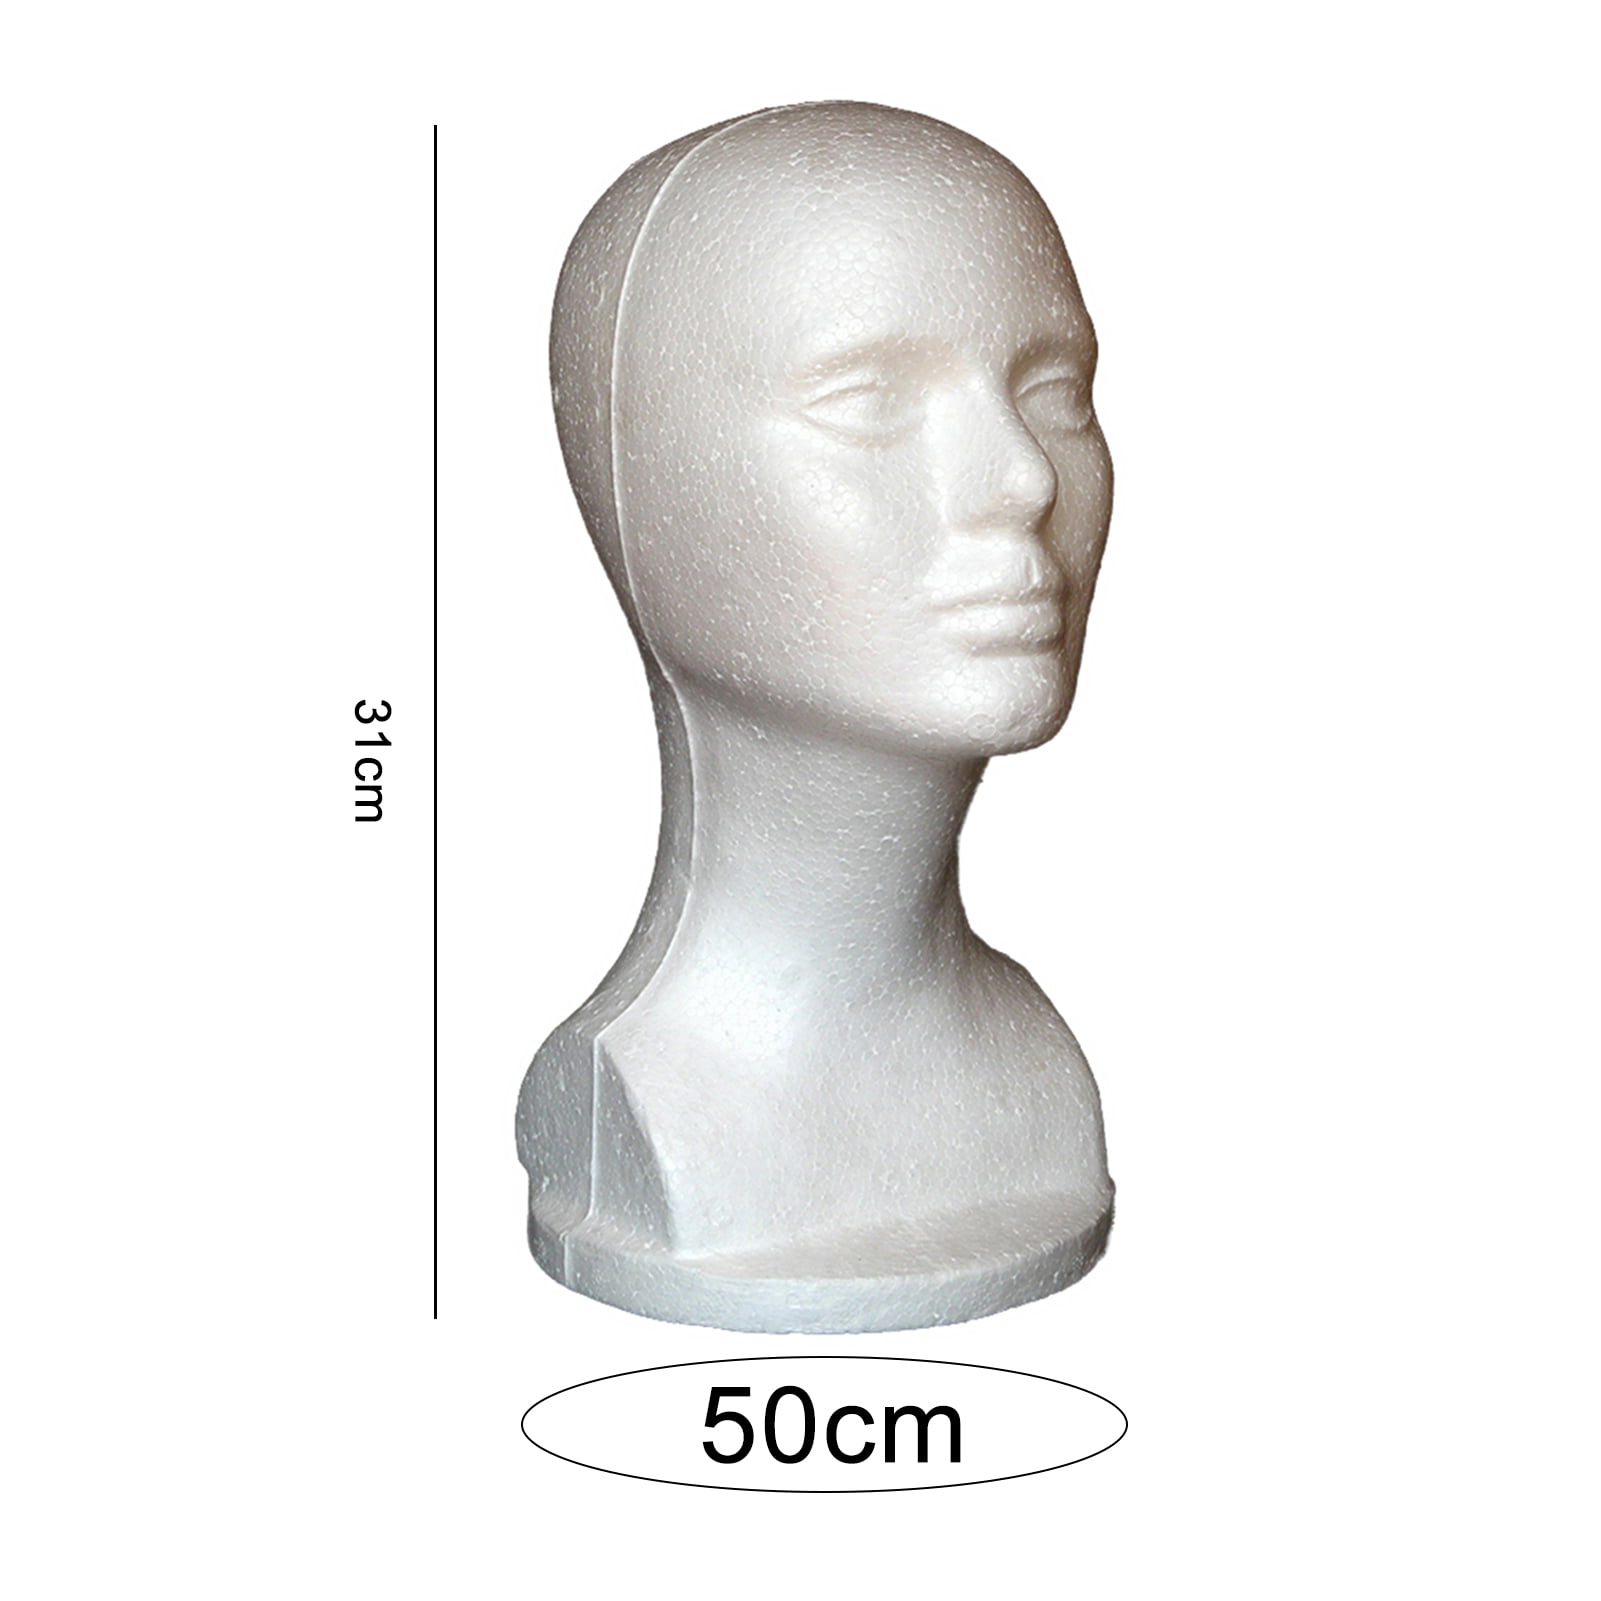 Happydeer 12 Styrofoam Wig Head - Foam Mannequin Wig Stand and Holder -  Style, Model And Display Hair, Hats and Hairpieces - For Home, Salon and  Travel,White Pack of 2 